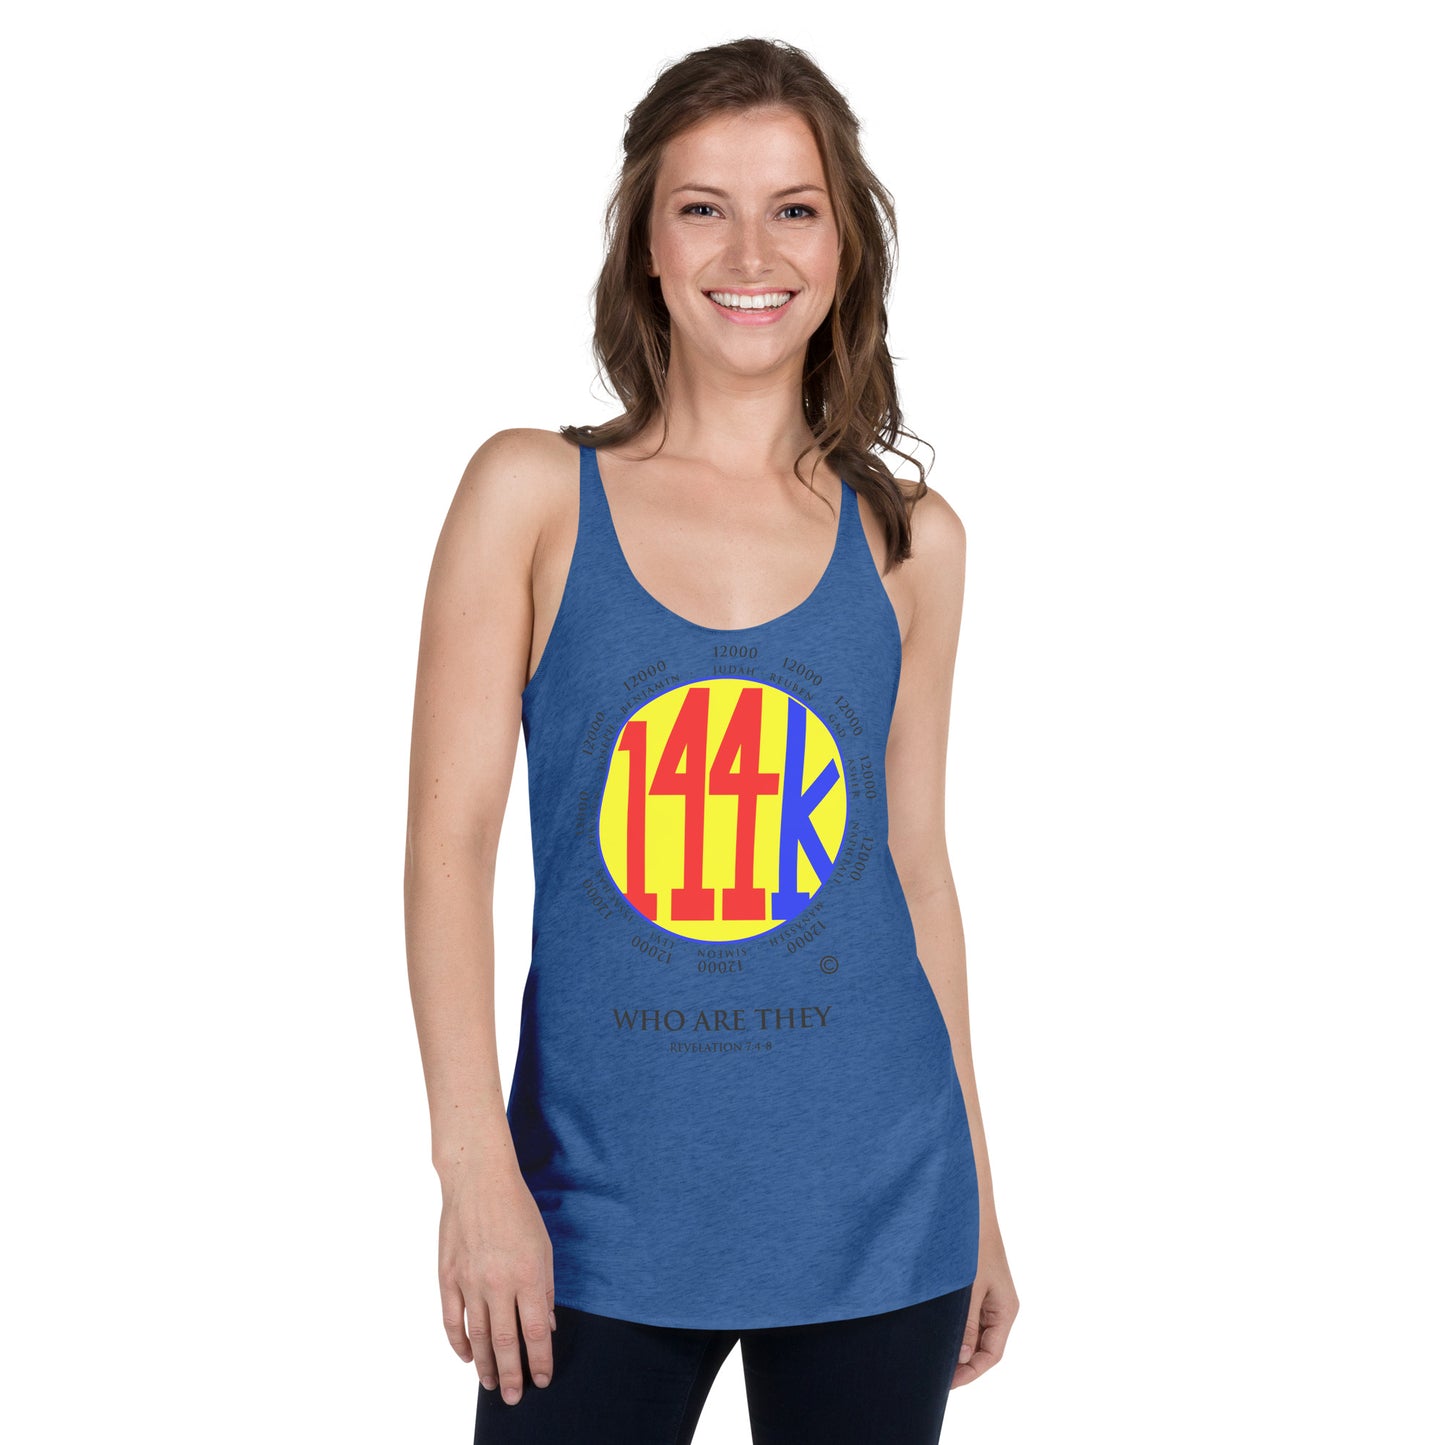 Who Are They Women's Racerback Tank